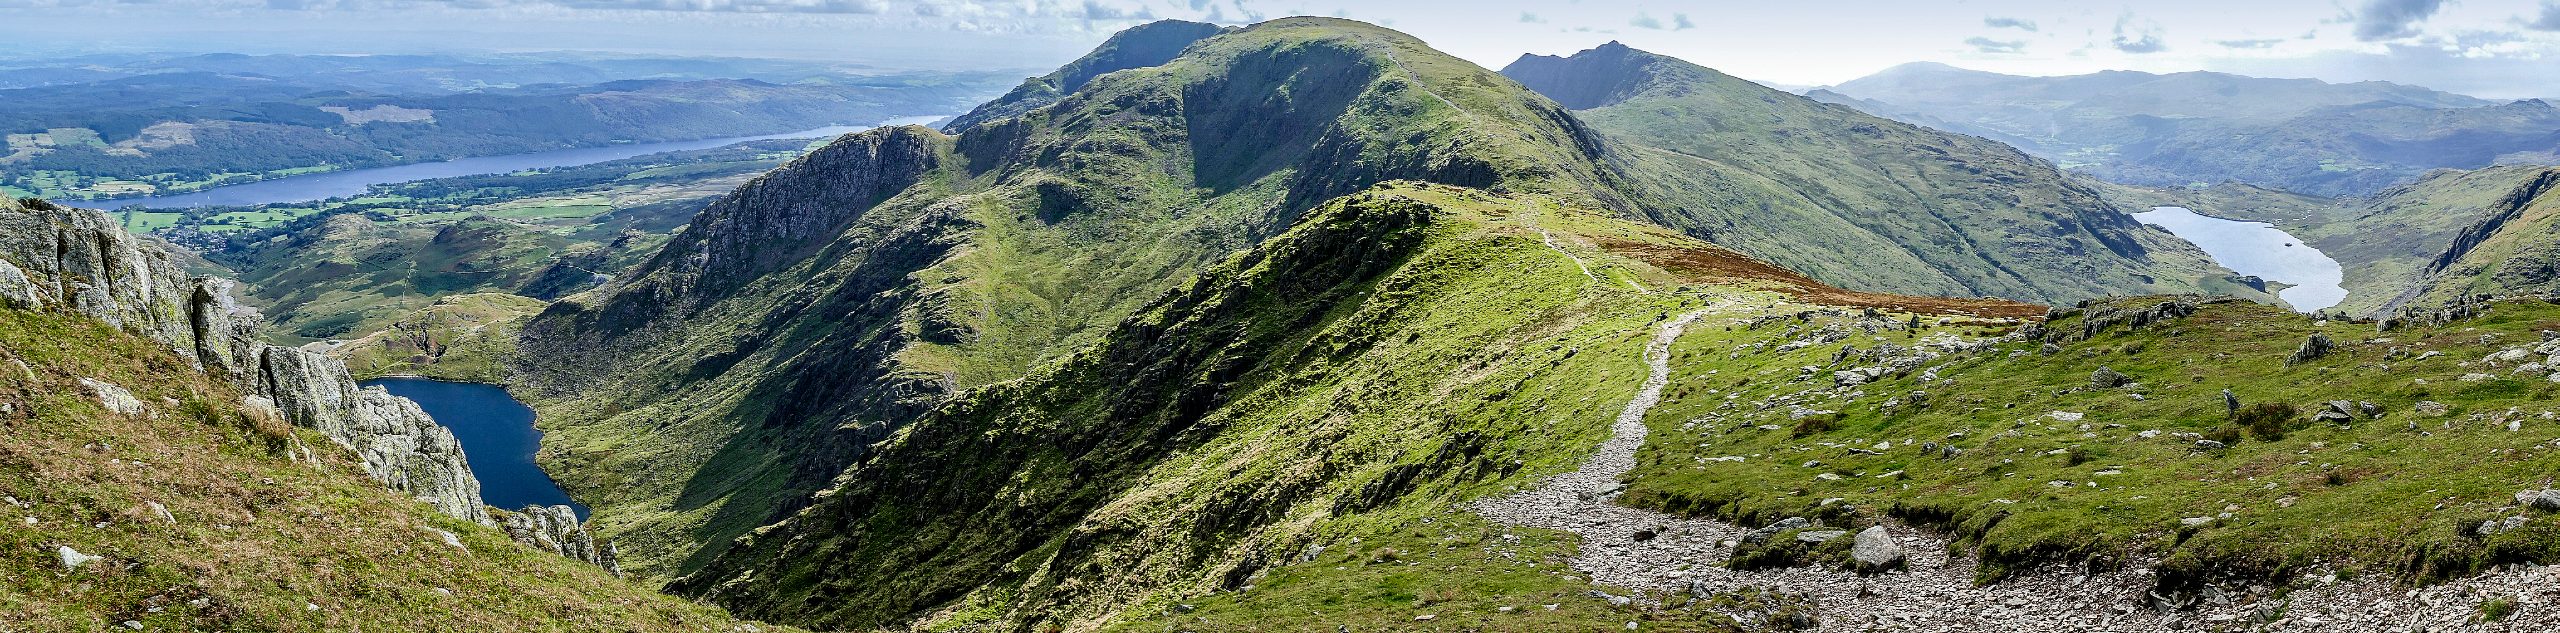 Old Man of Coniston, Swirl How, and Wetherlam Circular Walk Map